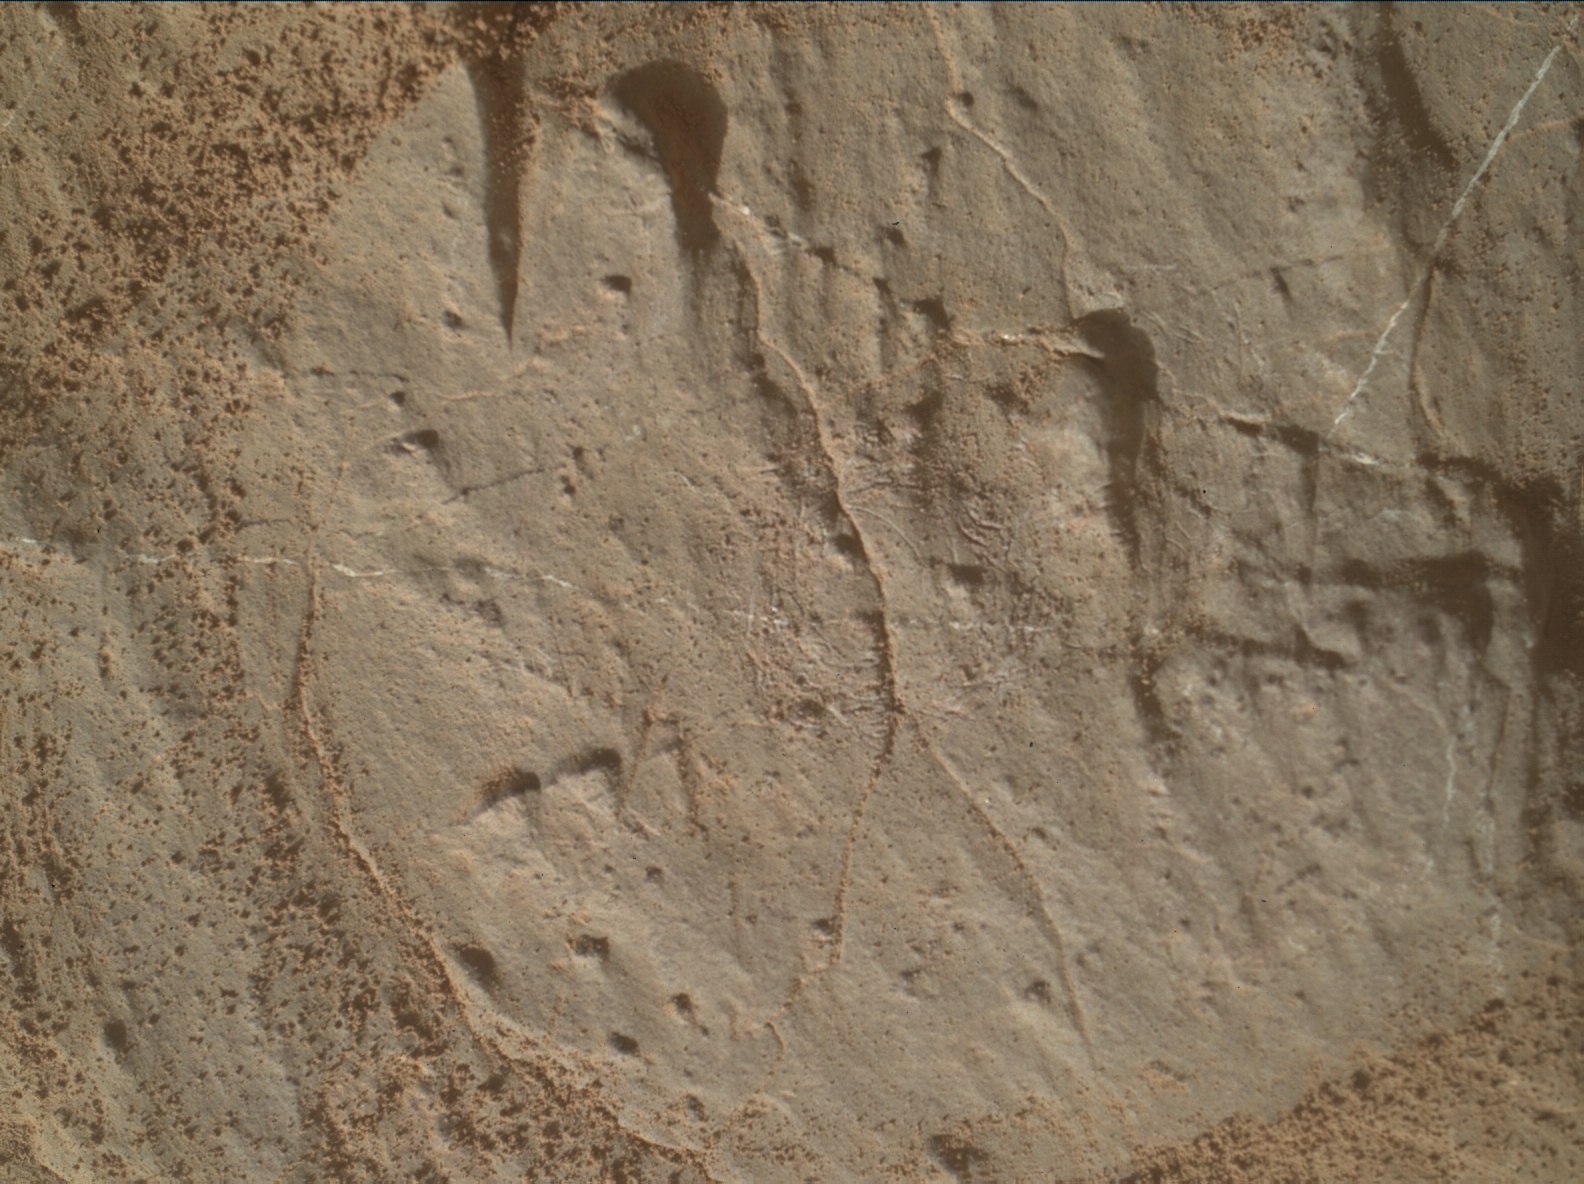 Nasa's Mars rover Curiosity acquired this image using its Mars Hand Lens Imager (MAHLI) on Sol 3119